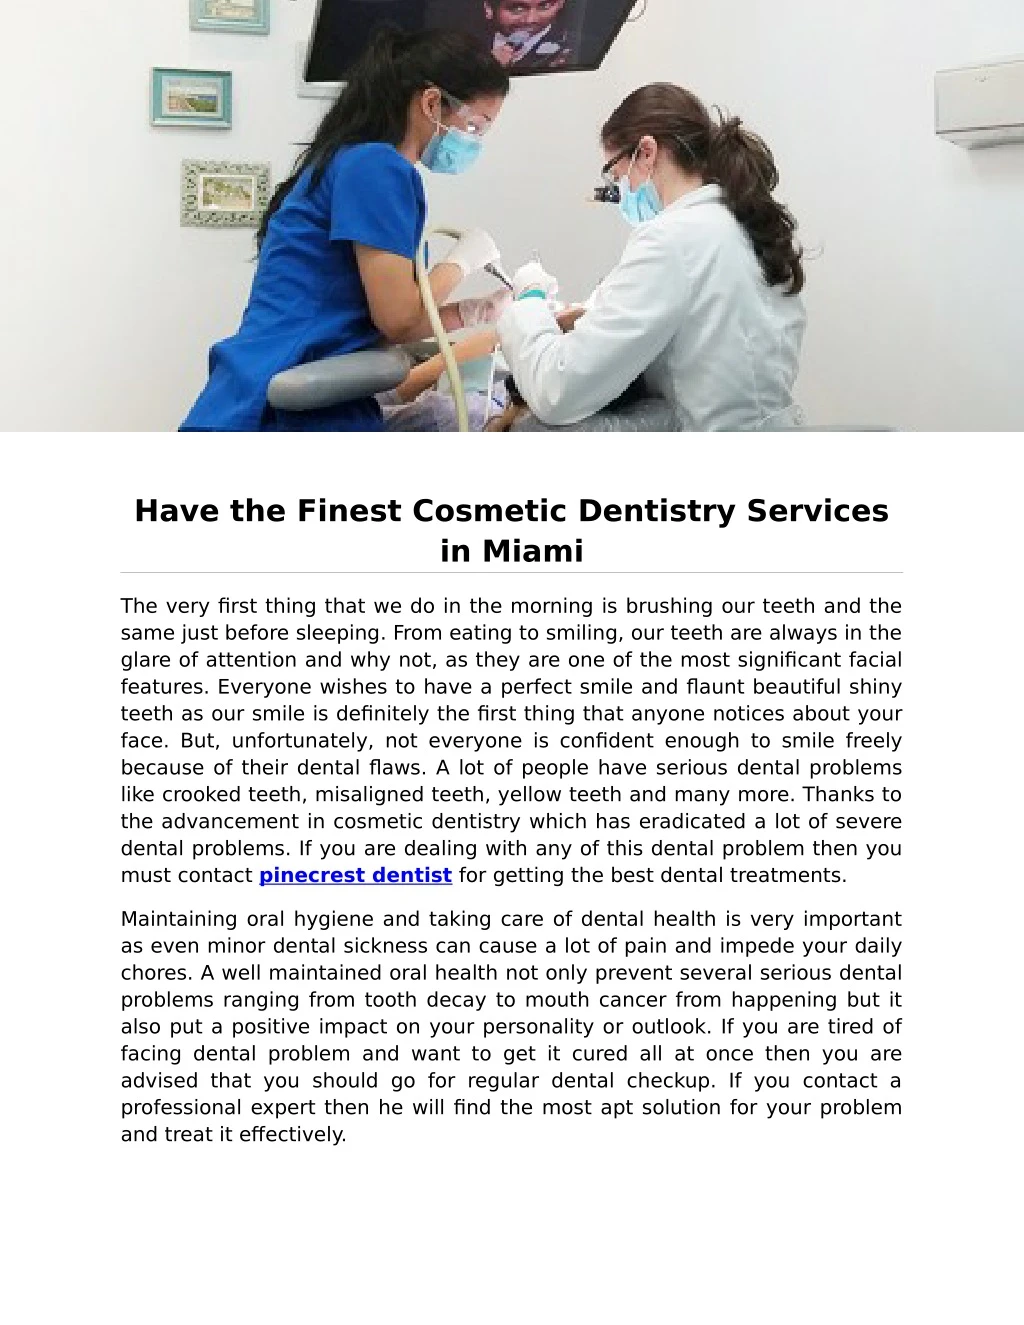 have the finest cosmetic dentistry services